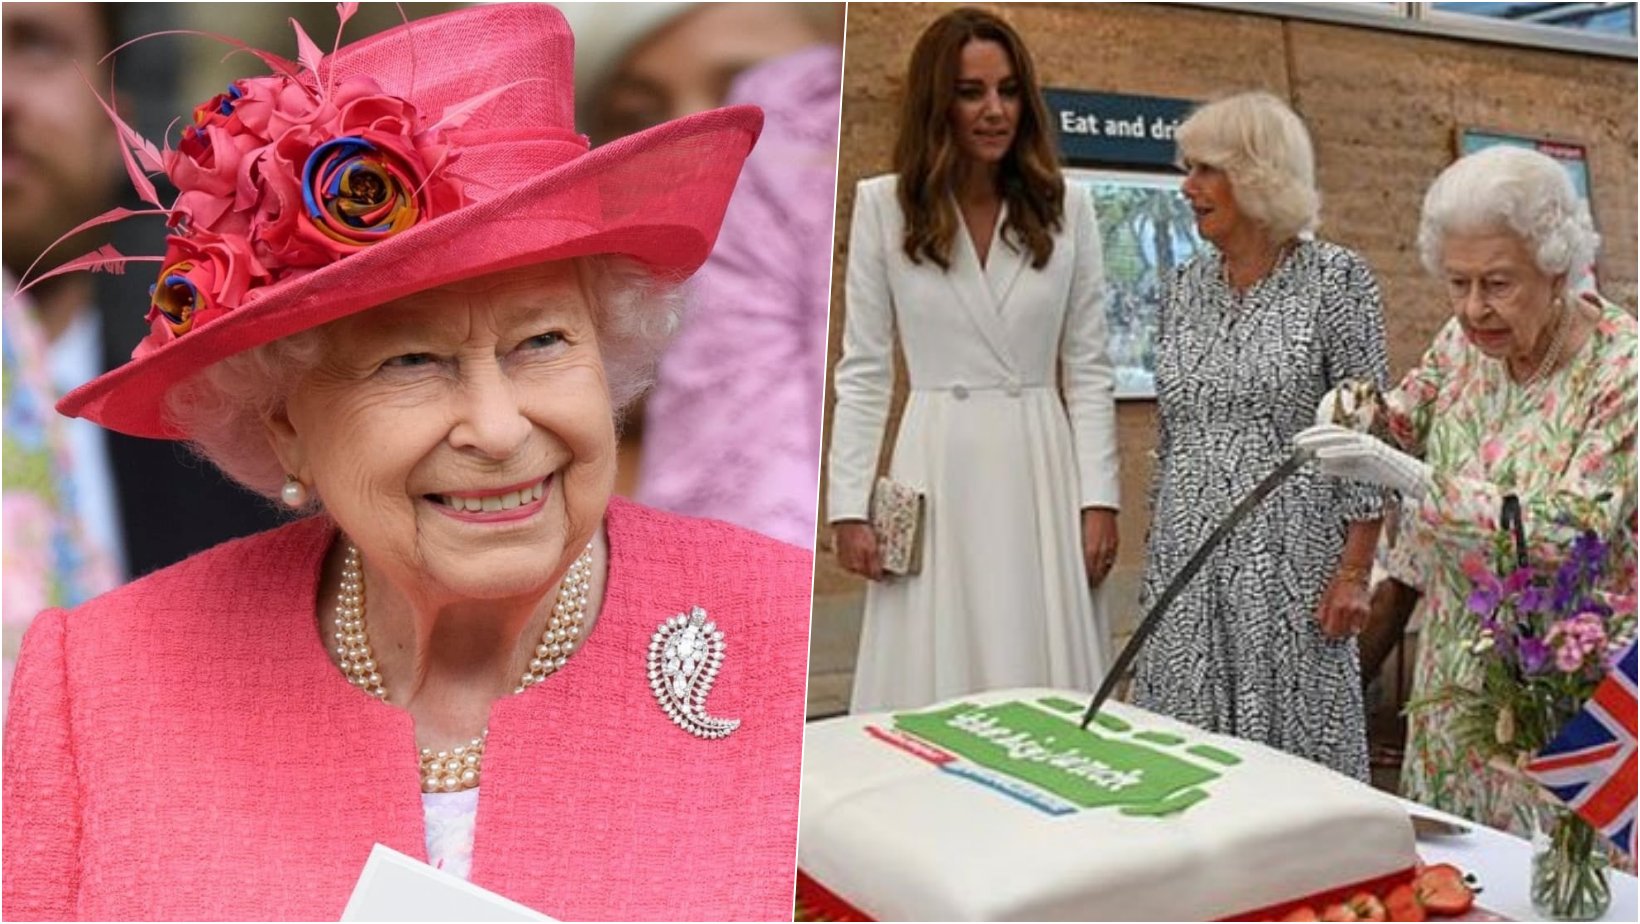 6 facebook cover 28.png?resize=1200,630 - The Queen 'Made A Record' For Cutting A Giant Festive Cake Using A Giant Ceremonial Sword